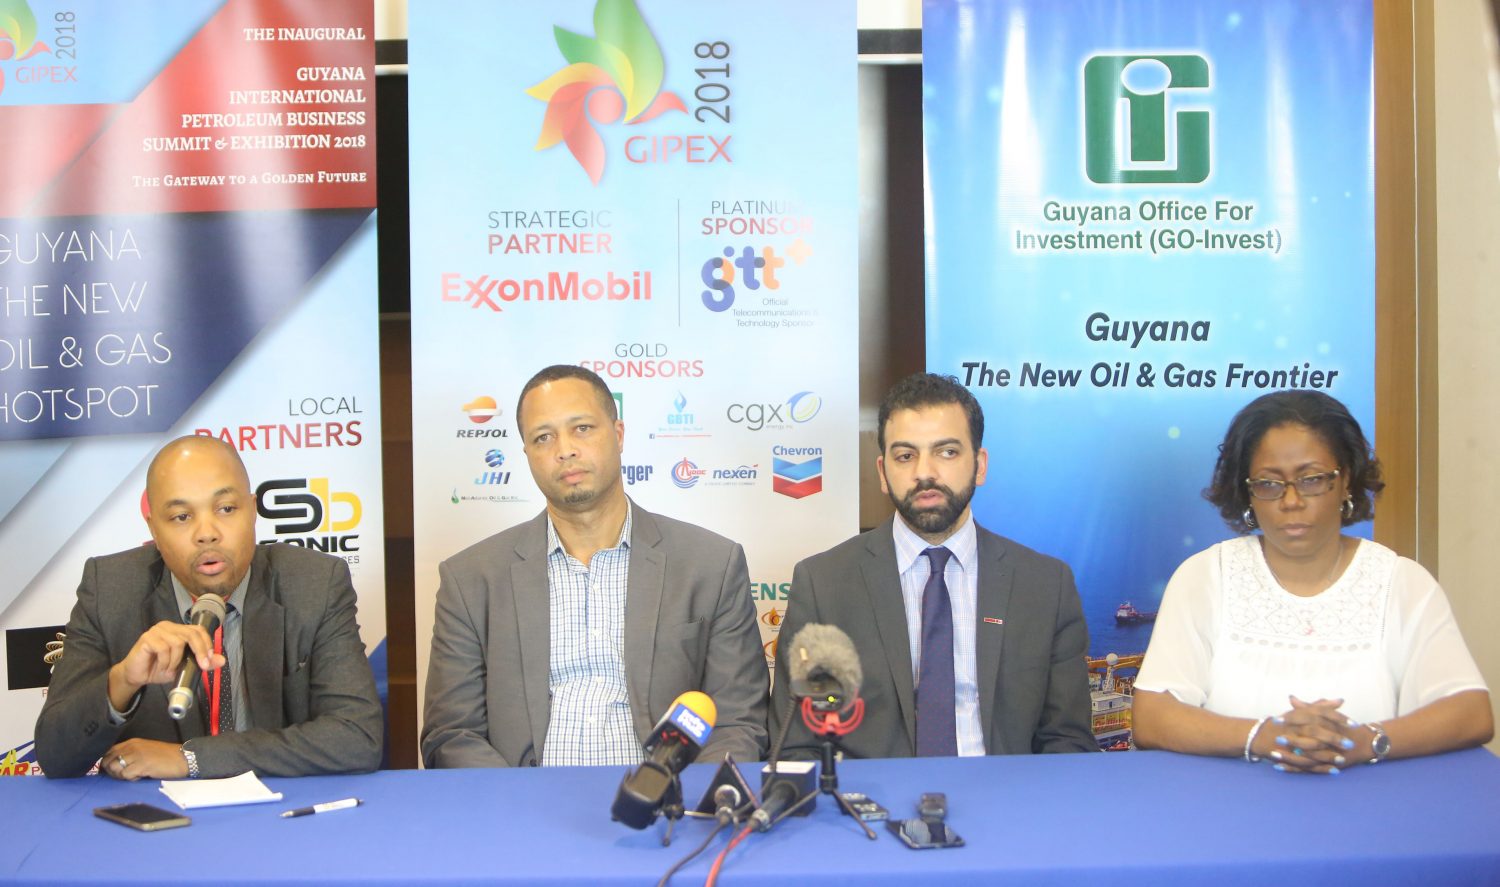 From left to right, Chris Chapwanya, Director of Sagacity Media, the local public relations partner; Owen Verwey, Head of Go-Invest; Shariq Abdulhai, Director of Valiant Business Media Group of the United Kingdom and Joanna Homer, Attorney for Ministry of Natural Resources. 